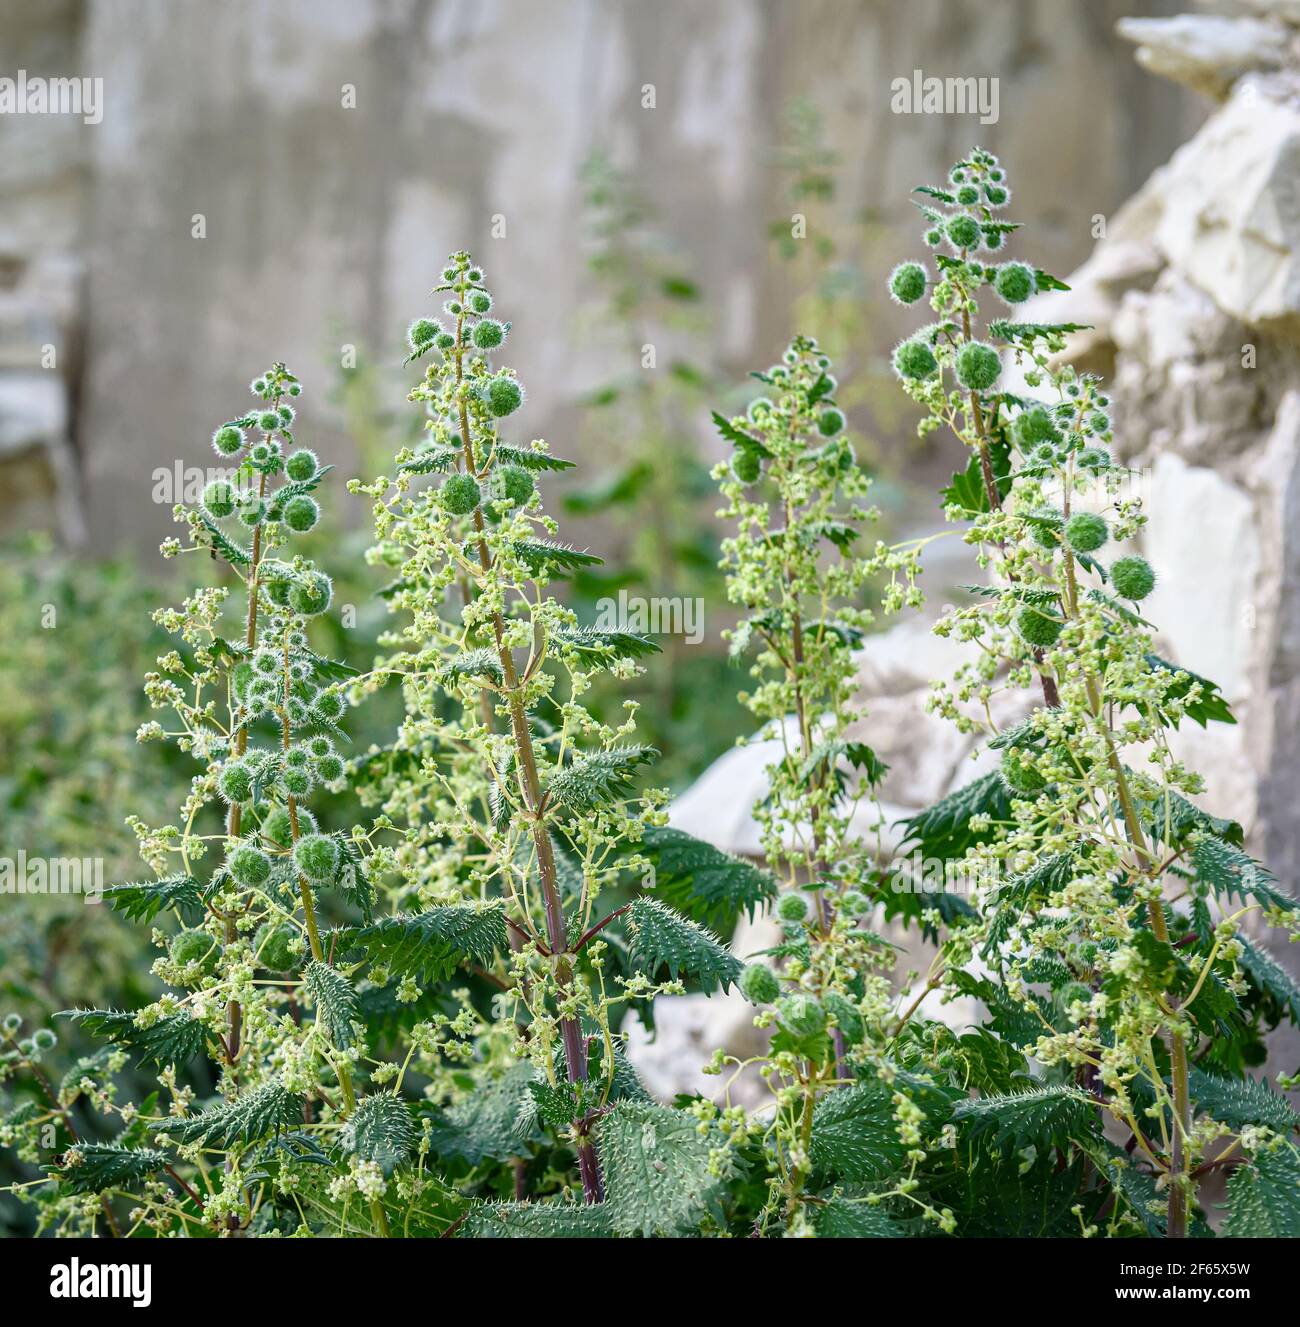 Roman nettle (Urtica pilulifera) in an abandoned place with stone ruins on background, selective focus Stock Photo